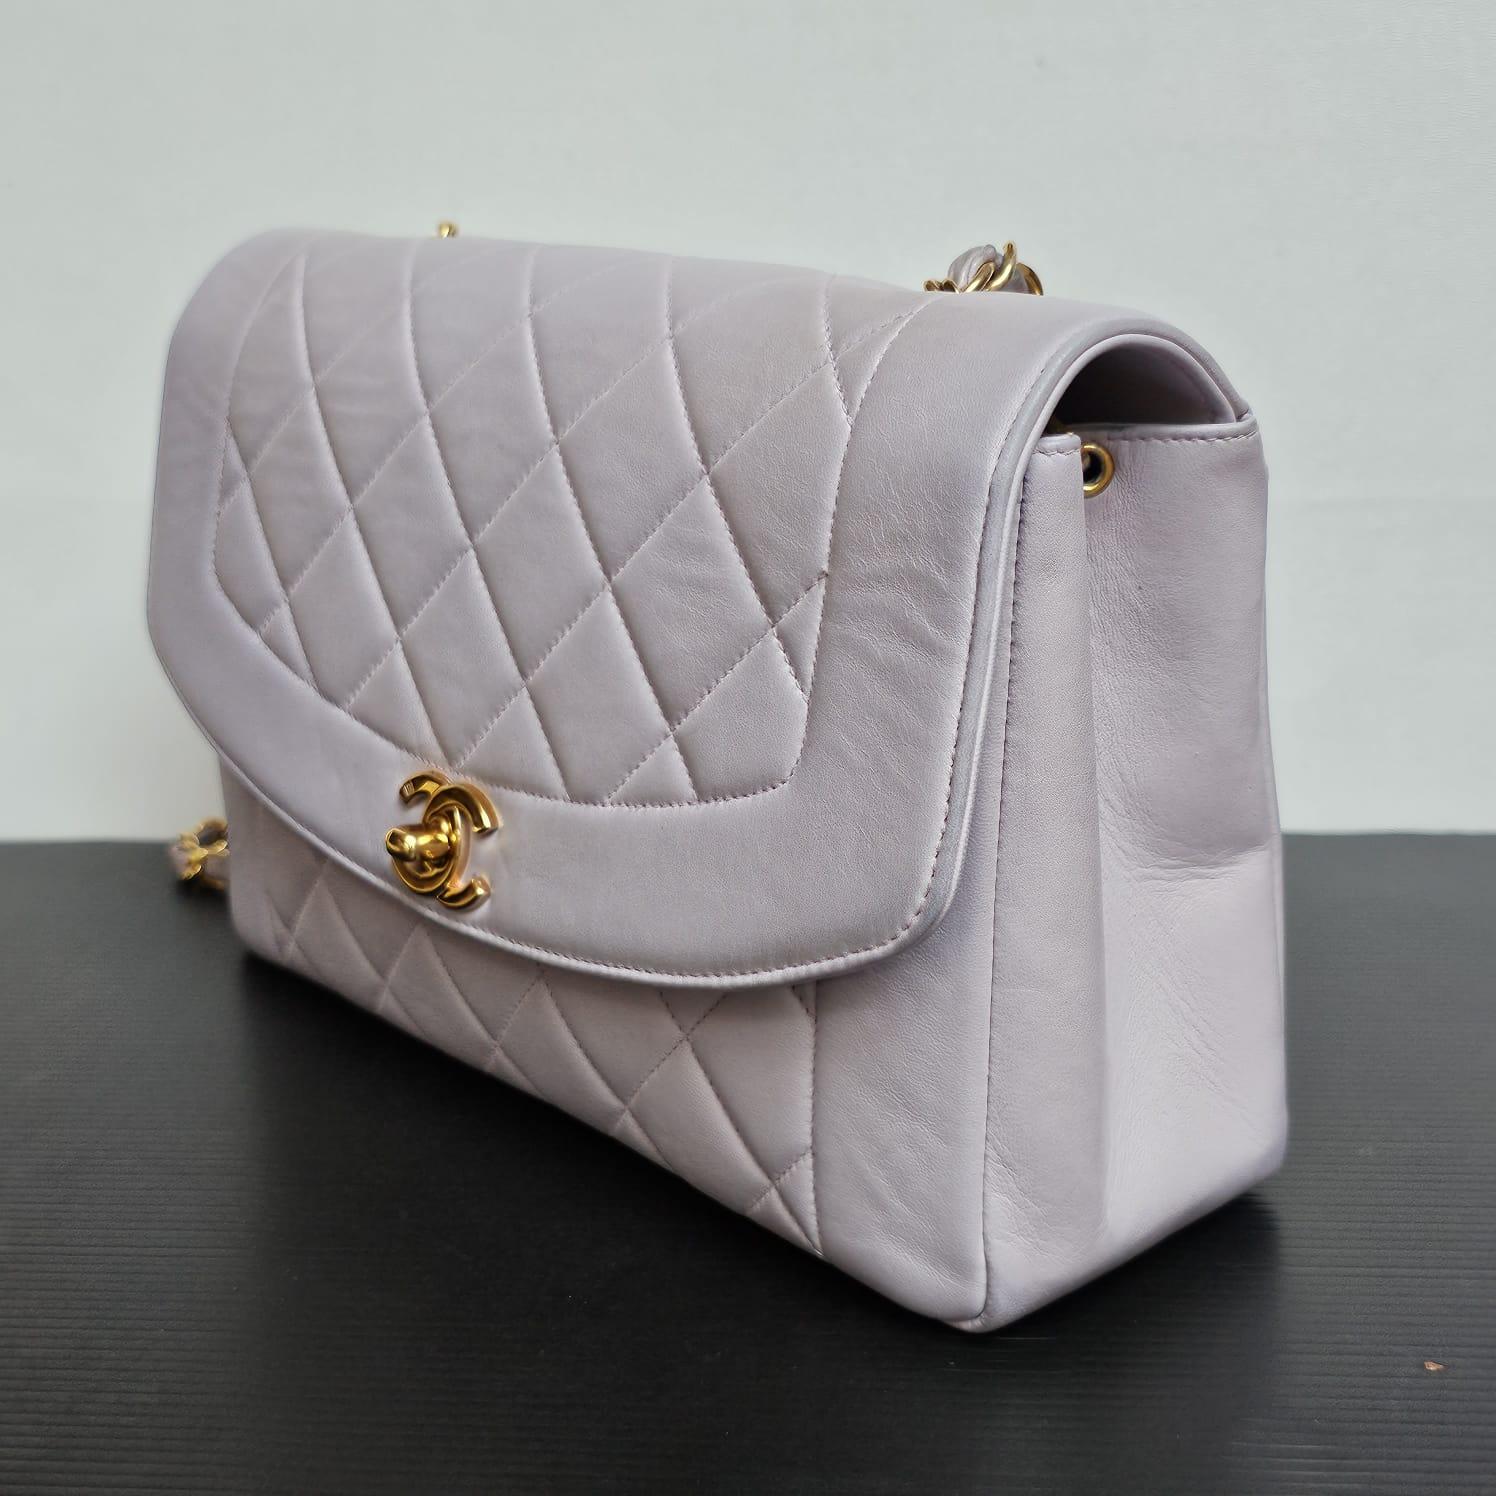 Rare Vintage Chanel Medium Lilac Lambskin Quilted Diana Flap Bag 10